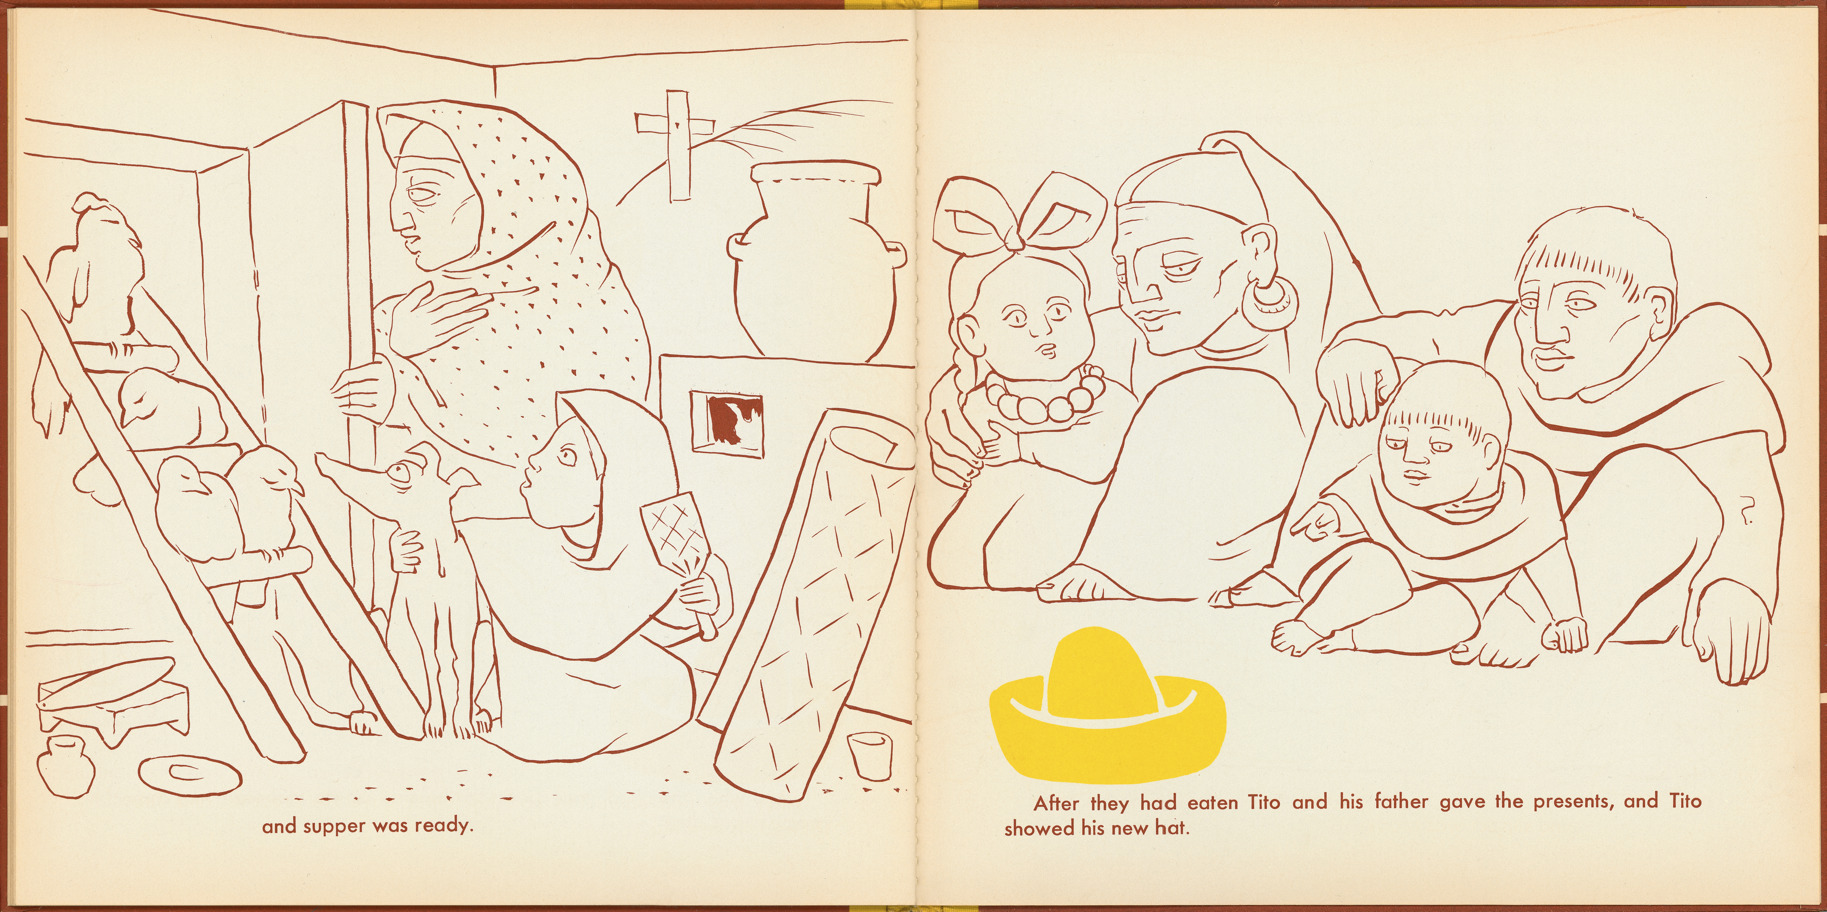 Pages 24–25 of 'Tito's Hats' written by Melchor G. Ferrer.  Illustrations by Jean Charlot.